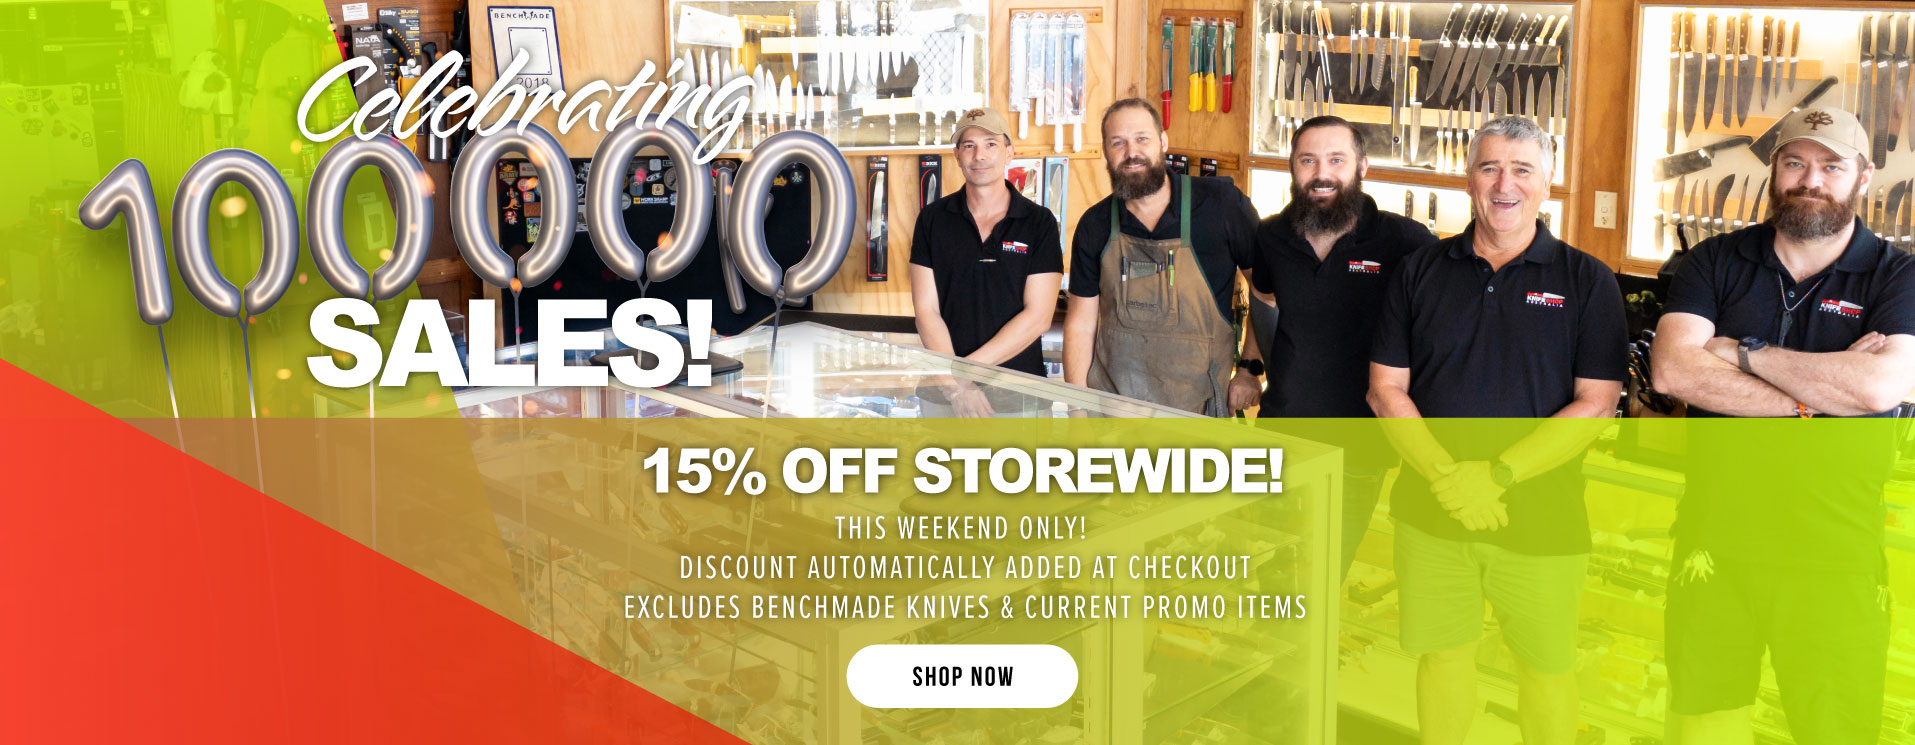 15% Storewide to Celebrate our 100,000 Sales